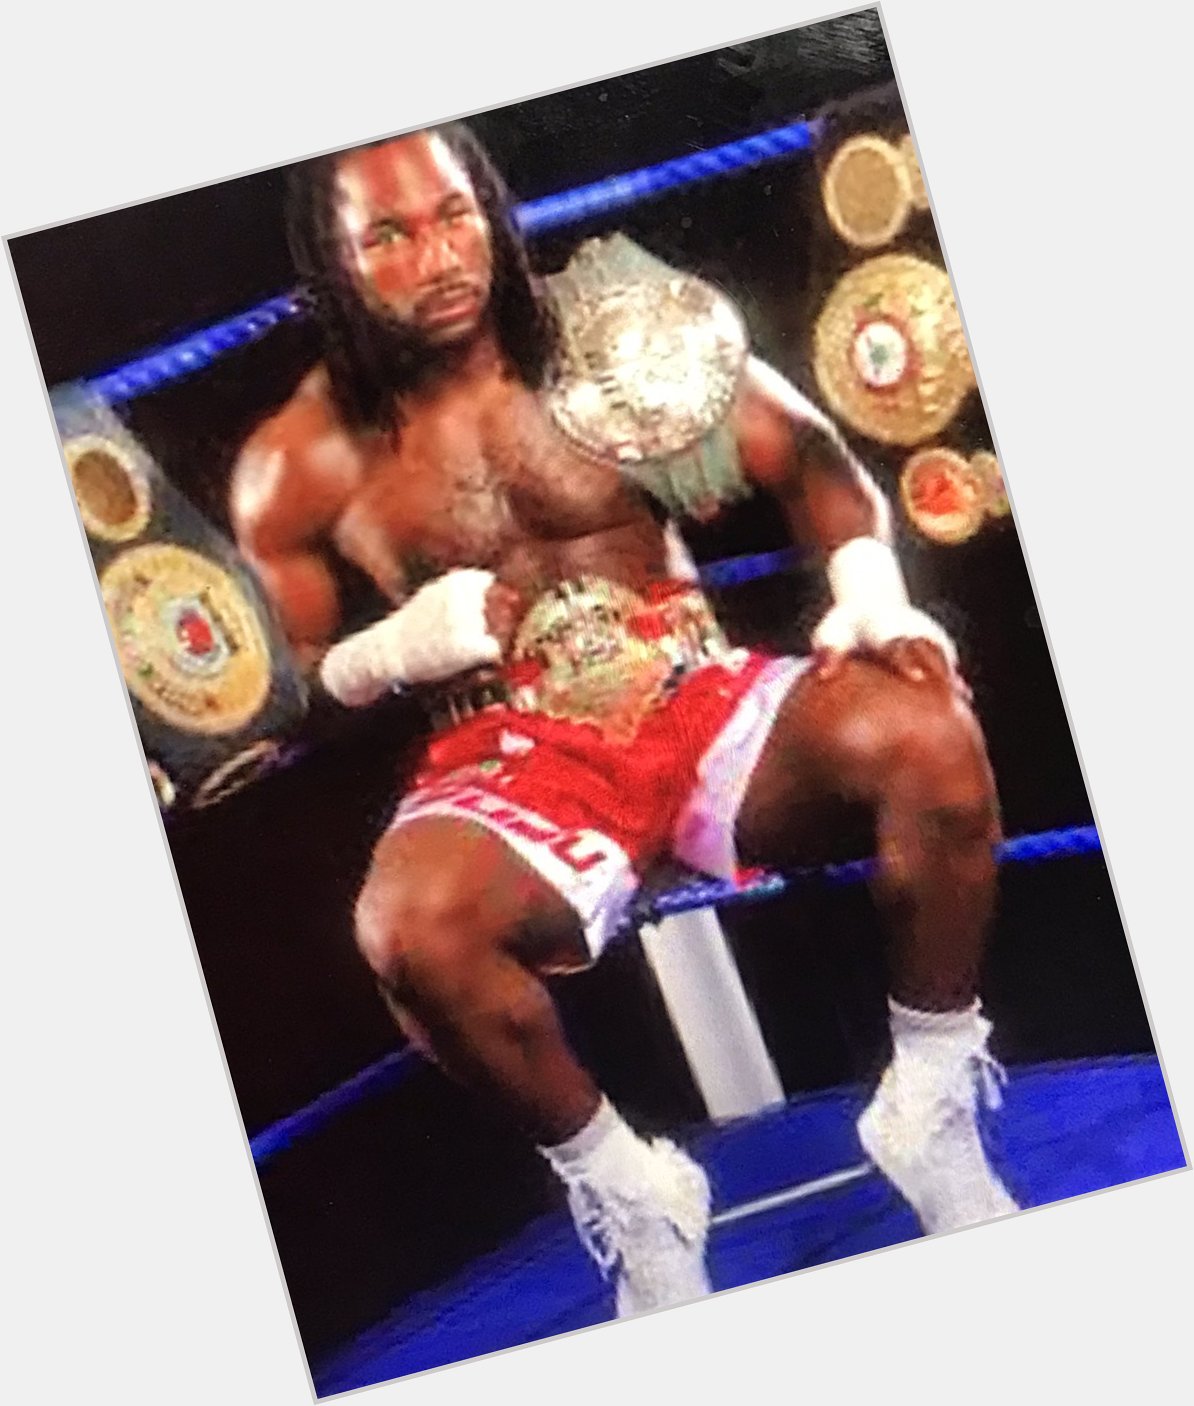 I would like to wish former 3 times heavyweight champion of the world Lennox Lewis a happy 57th birthday today 